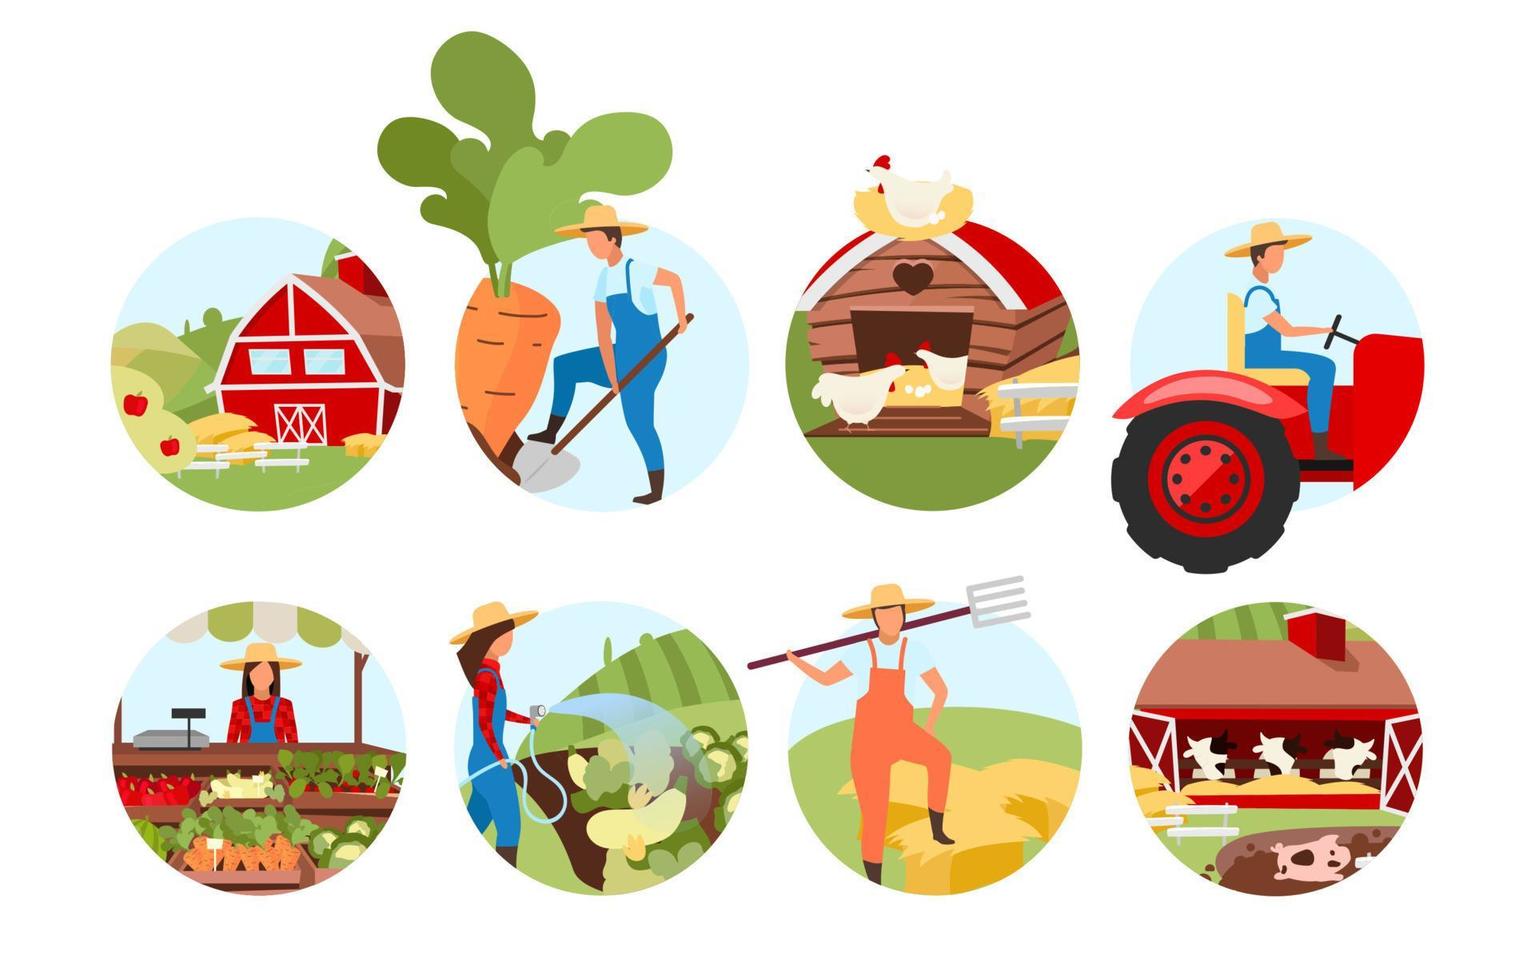 Farming flat concept icons set. Livestock and cattle farm. Agriculture stickers, cliparts pack. Farmers market produce. Crop plants cultivation, vegetable garden. Isolated cartoon illustrations vector